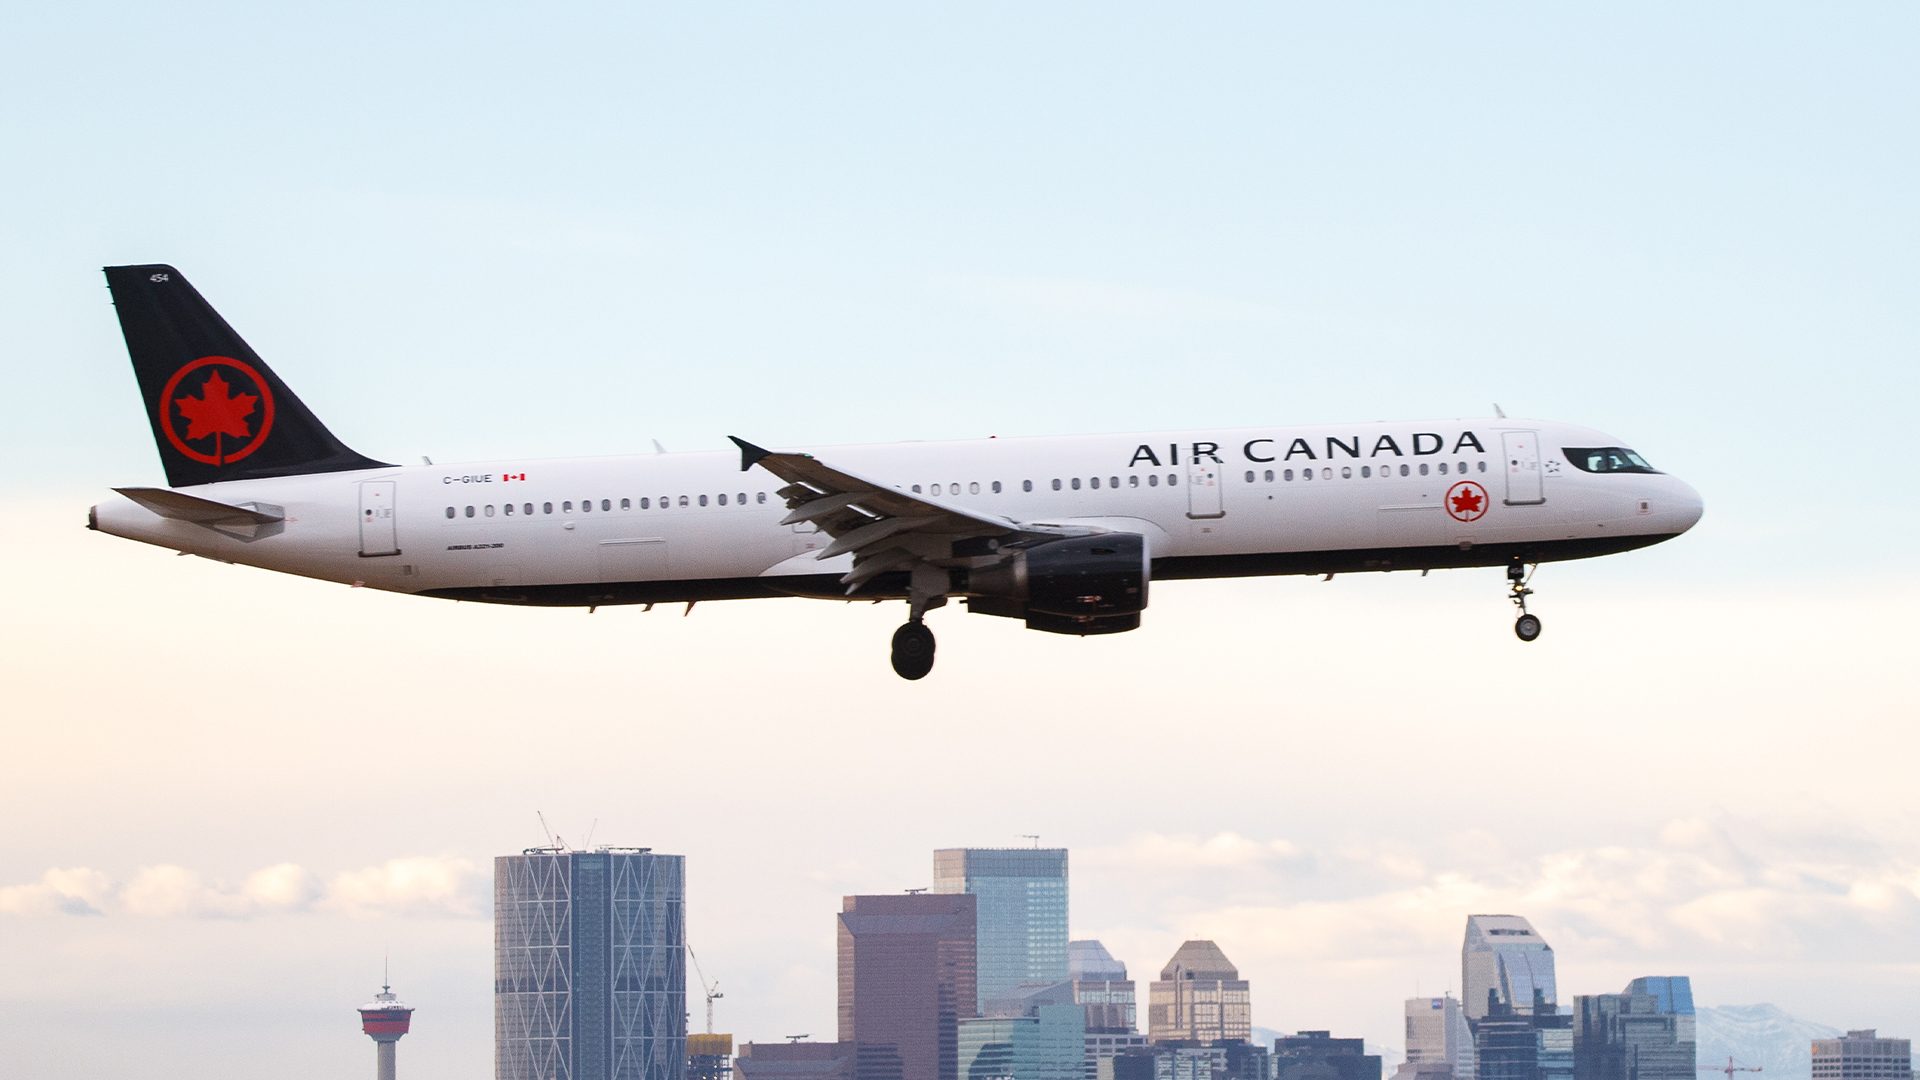 Air Canada ‘encouraged’ by government aid talks after C$4.65-billion loss